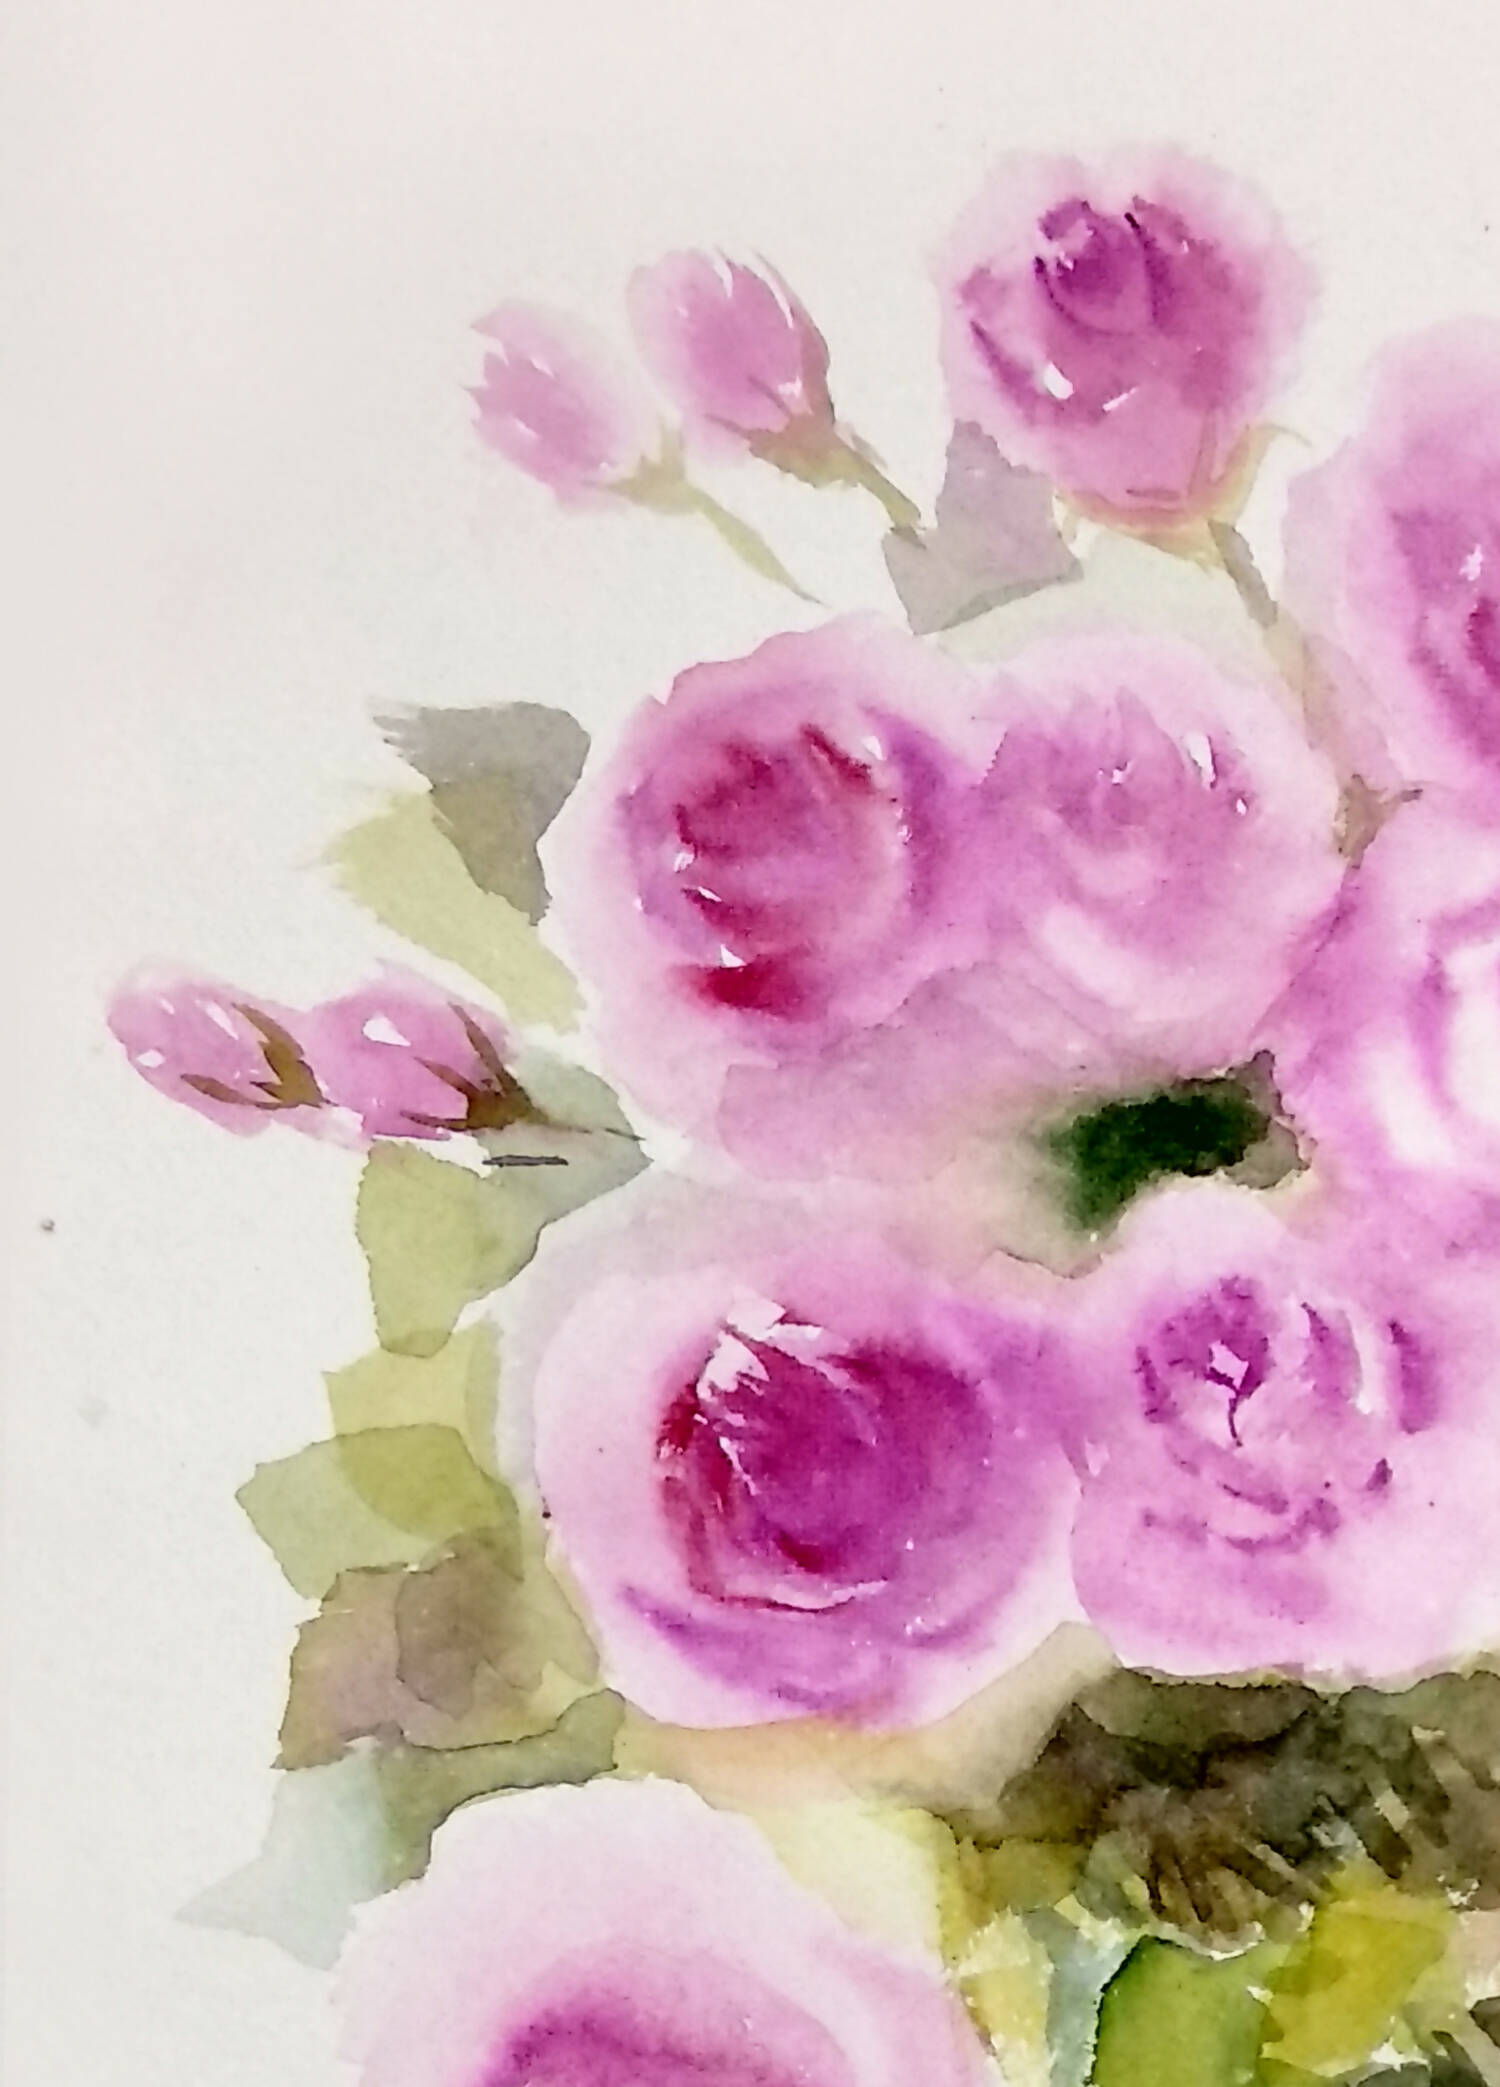 Pink Roses watercolors on paper